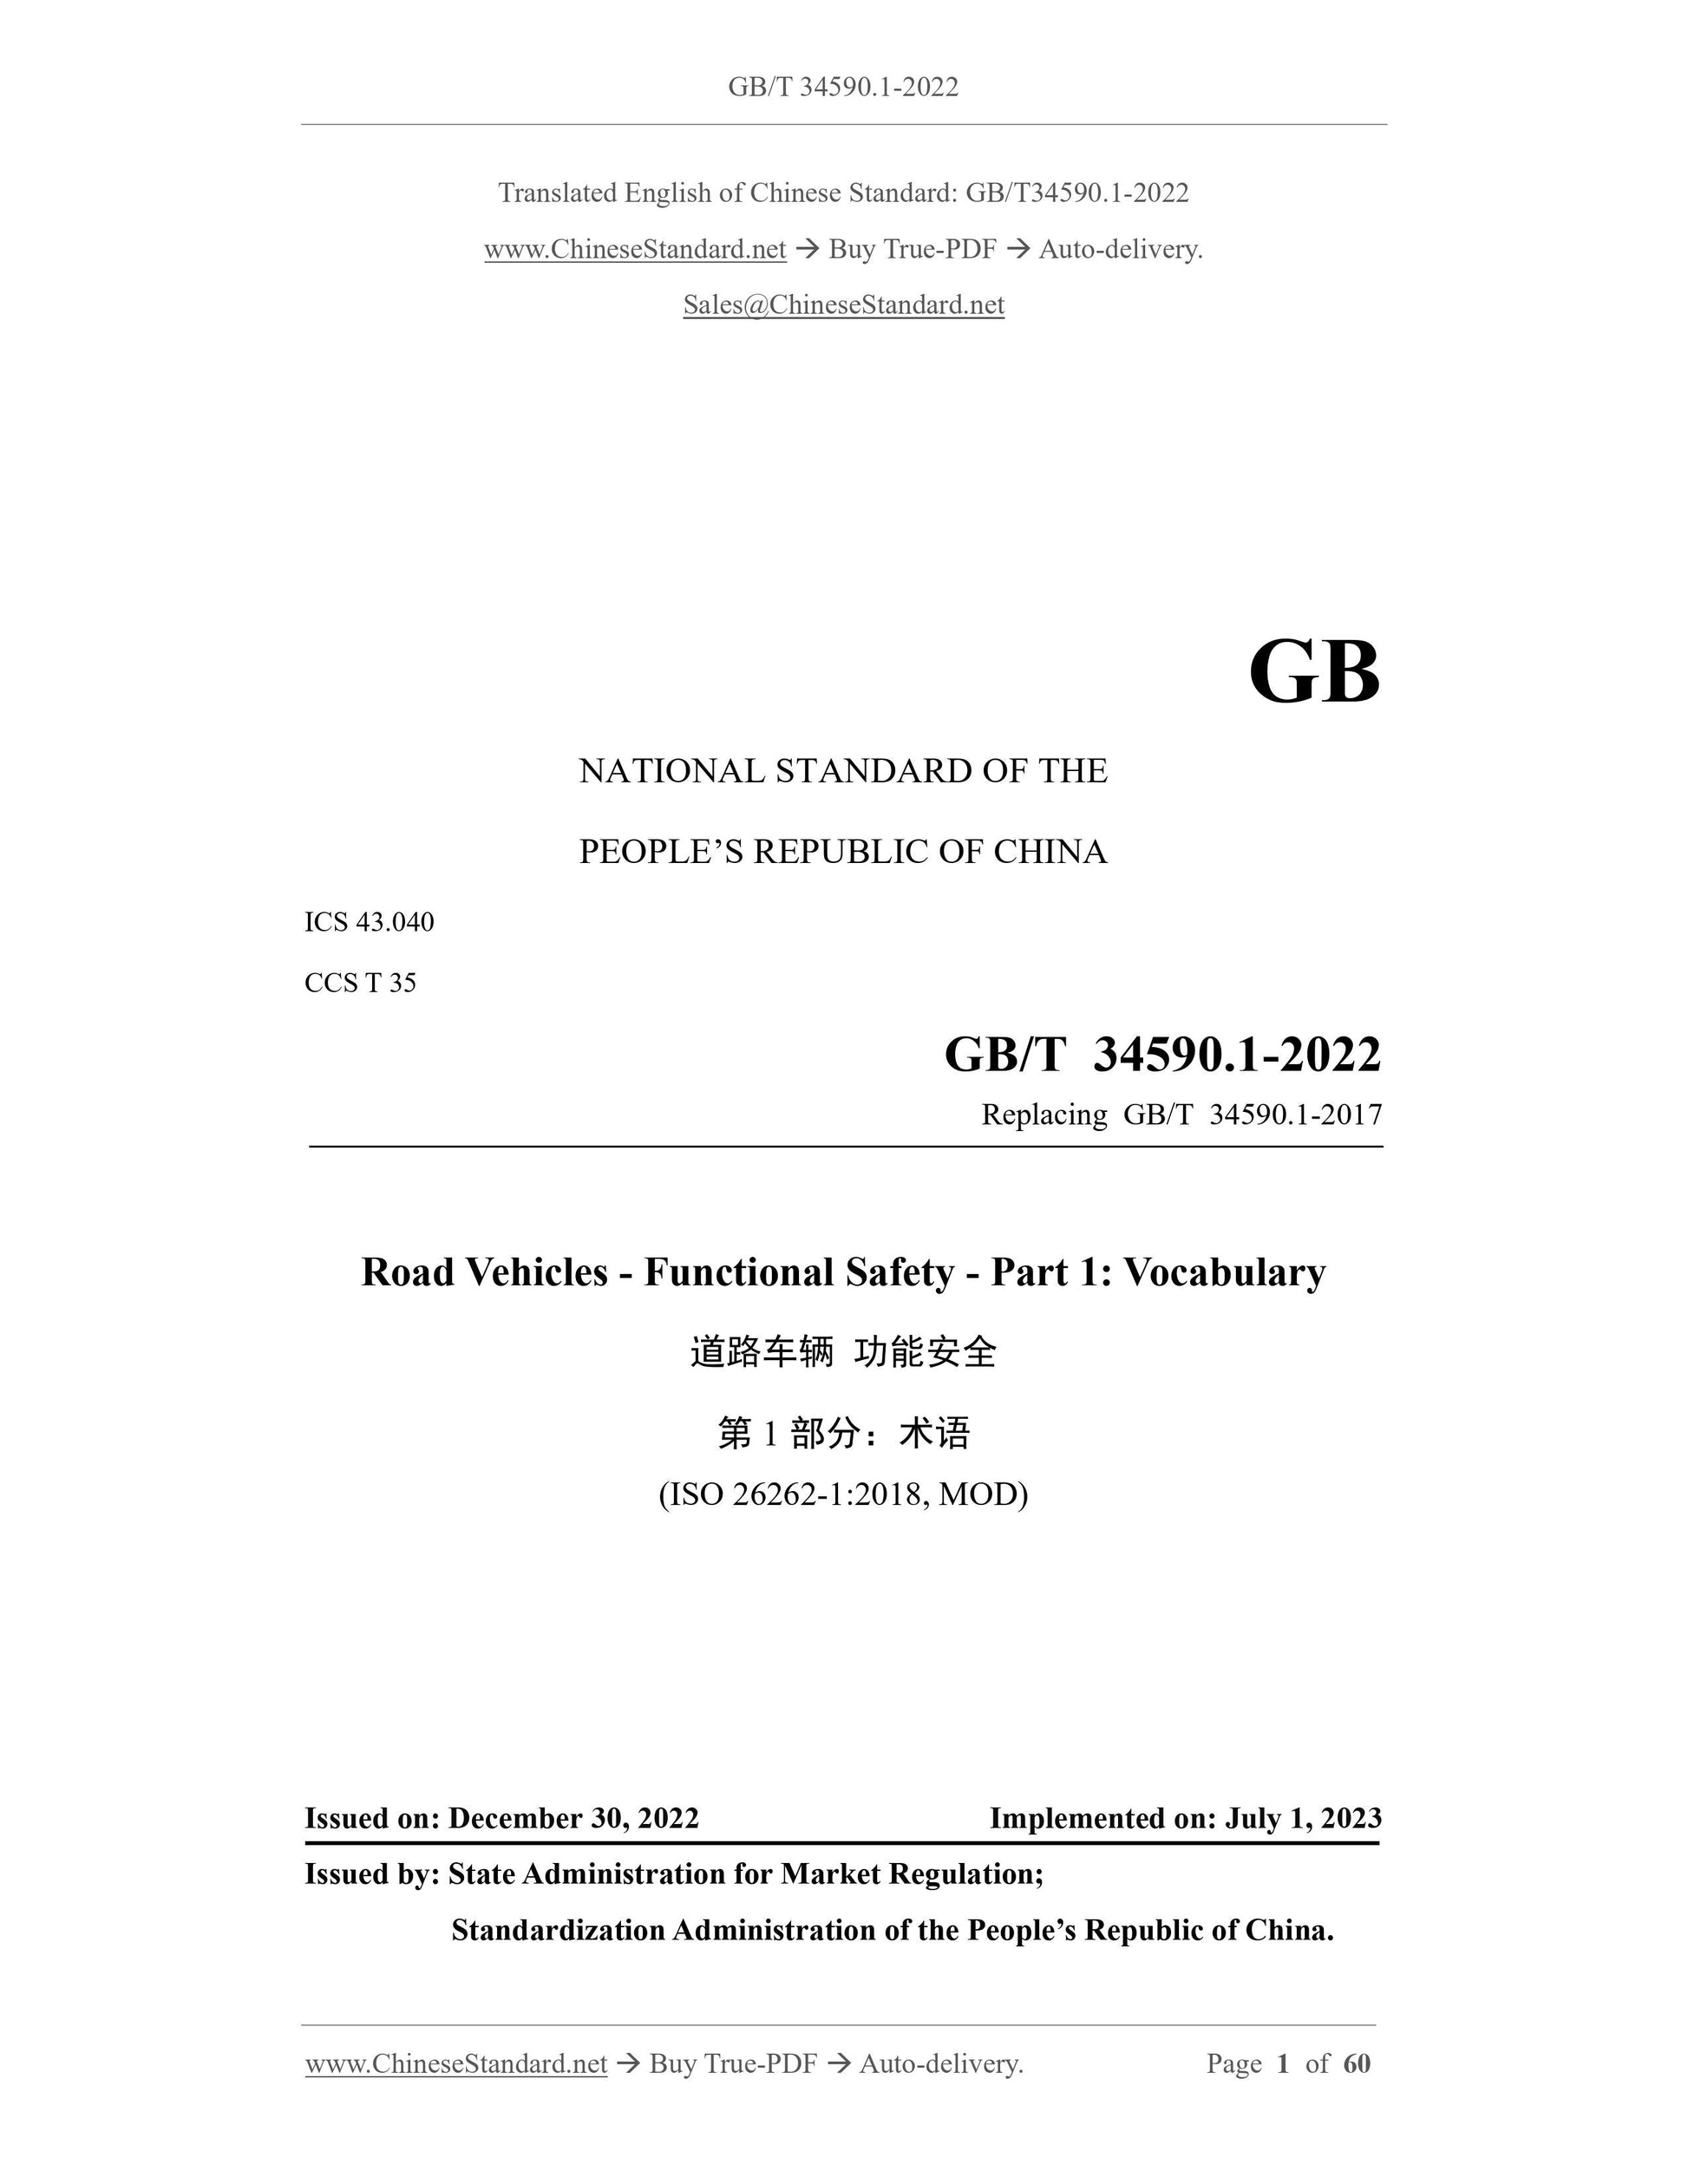 GB/T 34590.1-2022 Page 1